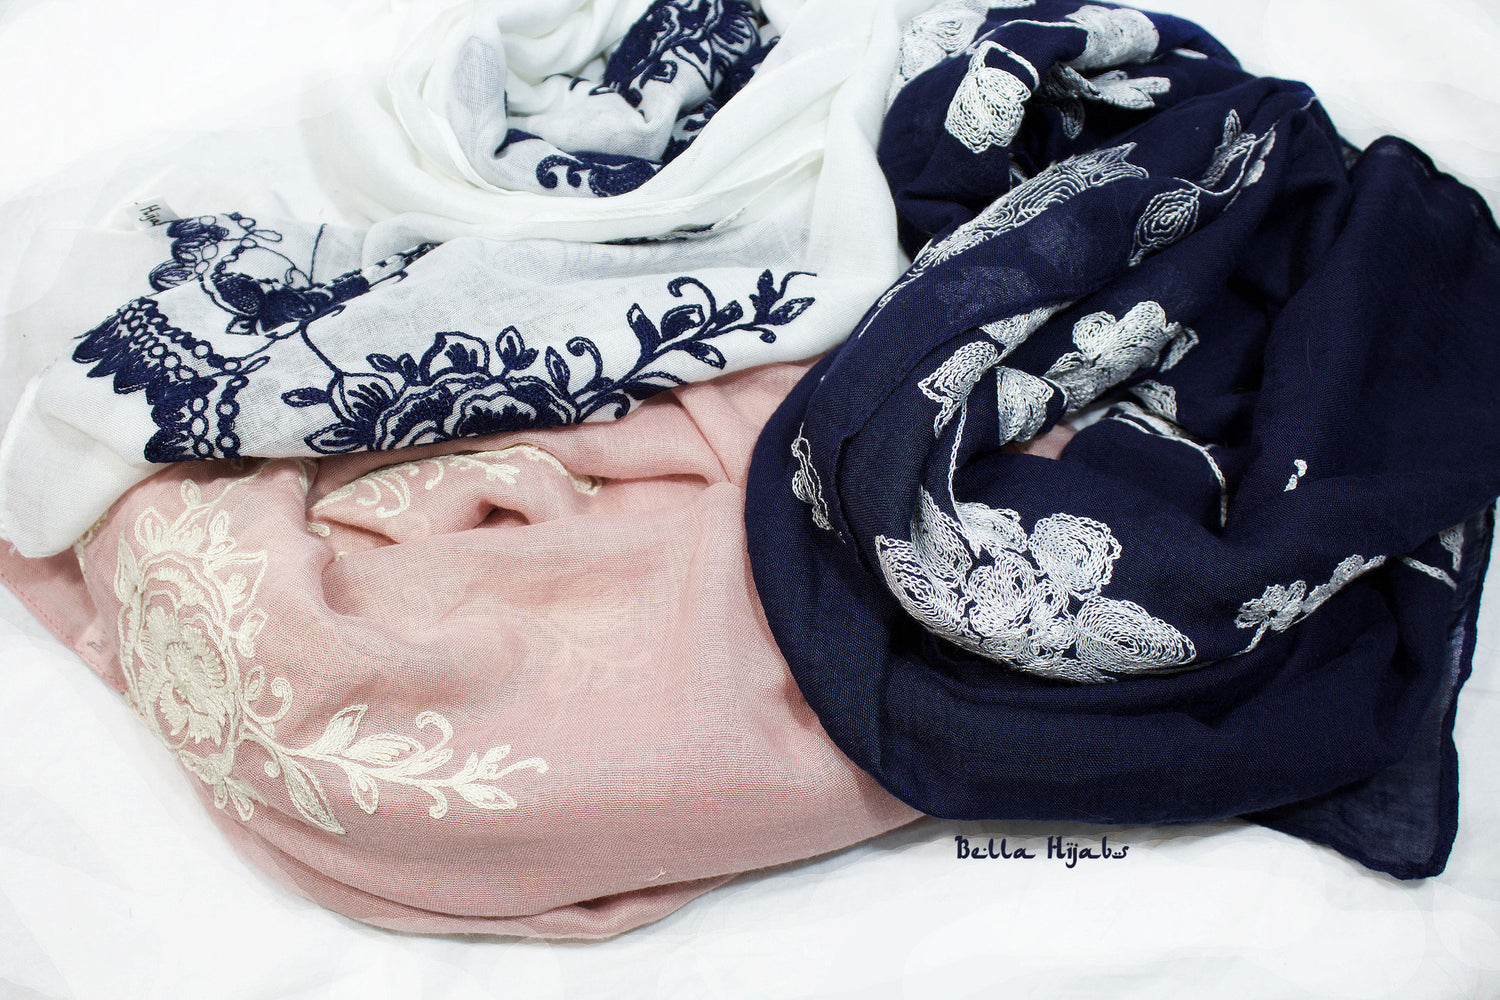 bundle of three floral embroidery hijabs in white, blush pink, and navy blue